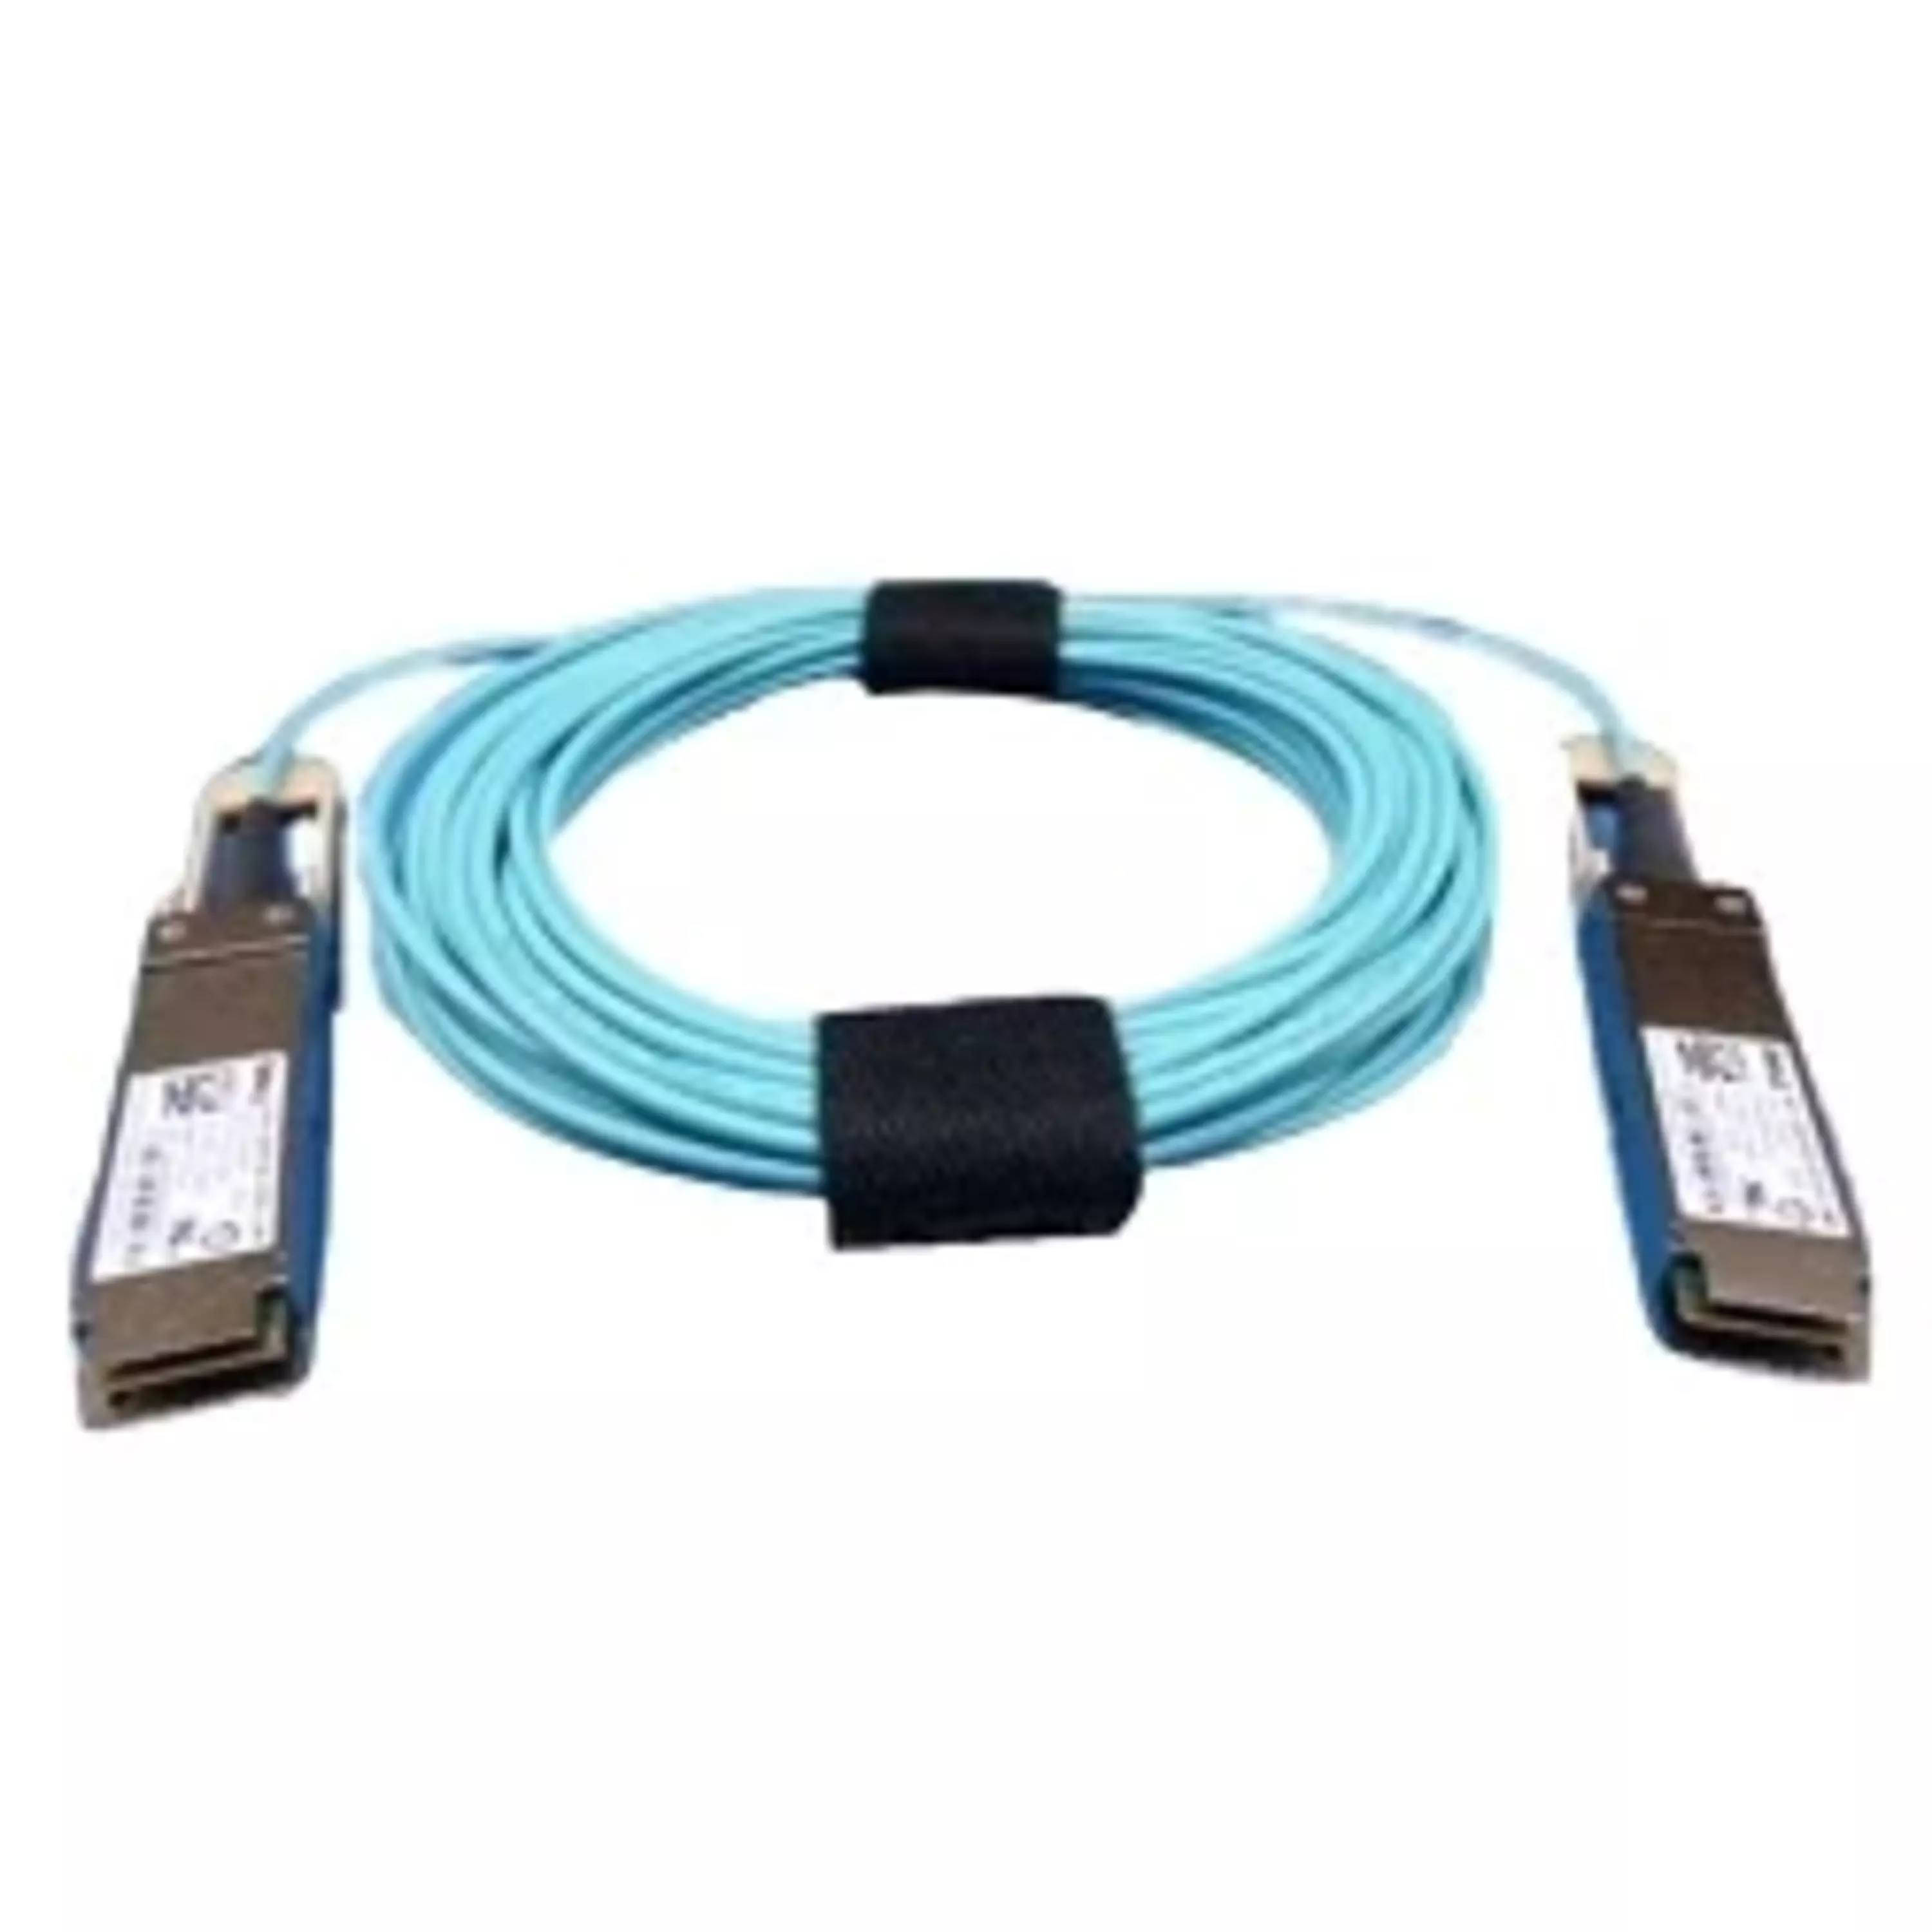 Dell Networking Cable, QSFP28 to QSFP28, 100GbE, Active Optical Cable ( Optics Included), 10 meter